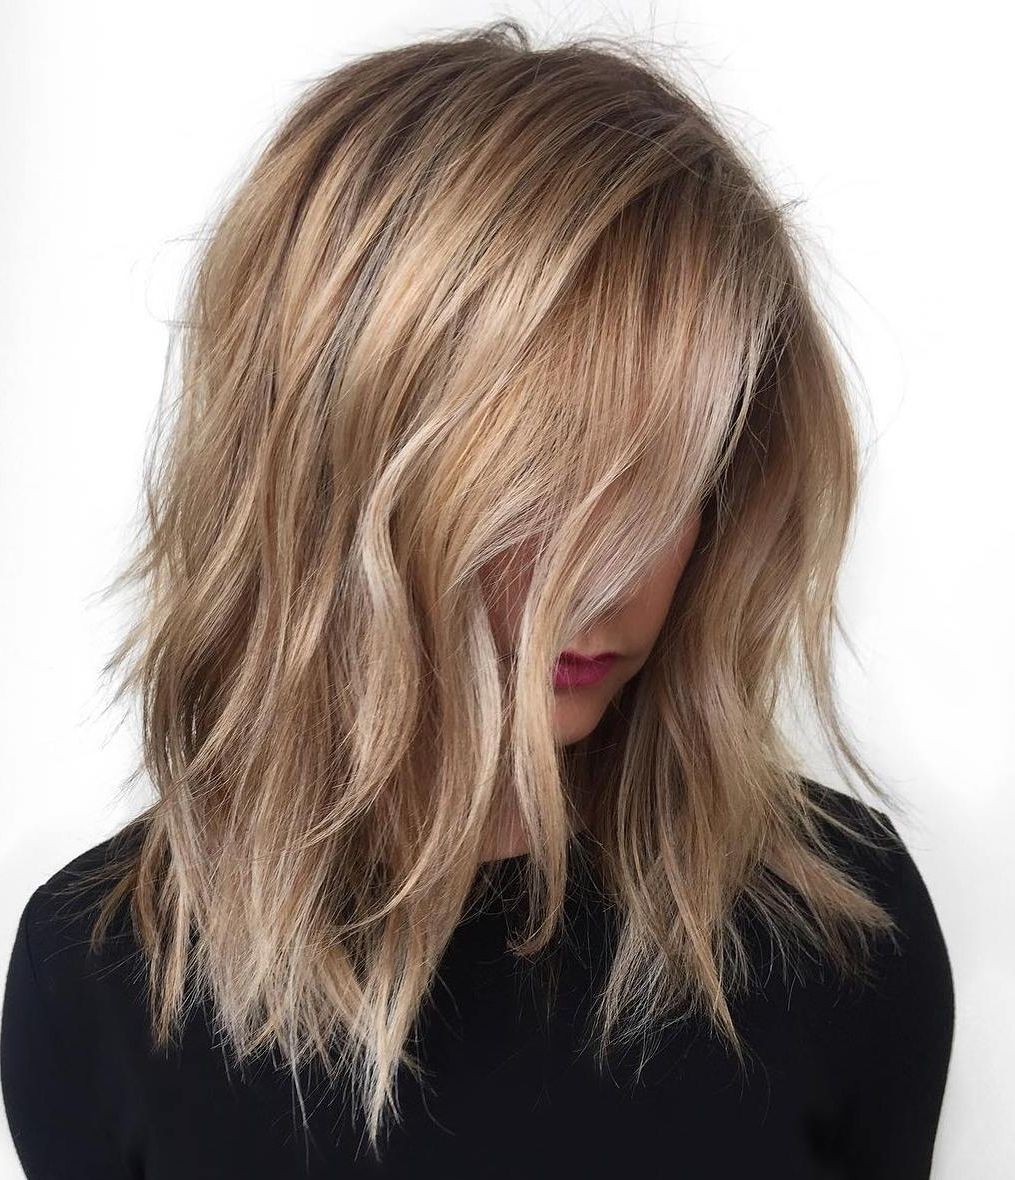 Trendy Icy Highlights And Loose Curls Blonde Hairstyles Regarding 40 Styles With Medium Blonde Hair For Major Inspiration (View 5 of 20)